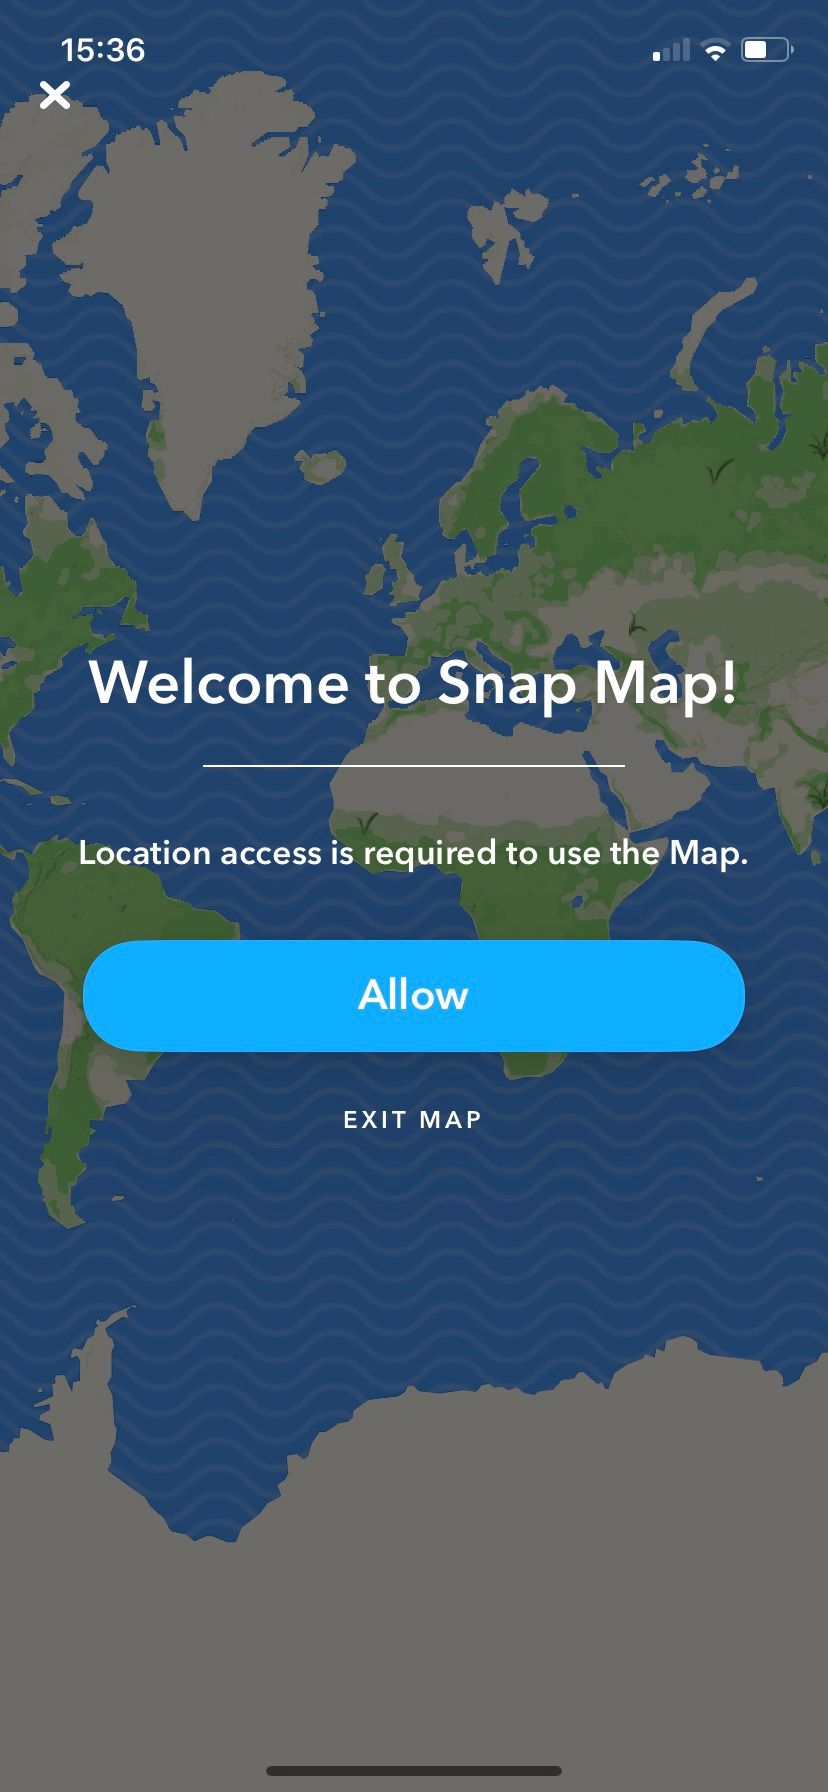 How to access Snap Map location on Snapchat